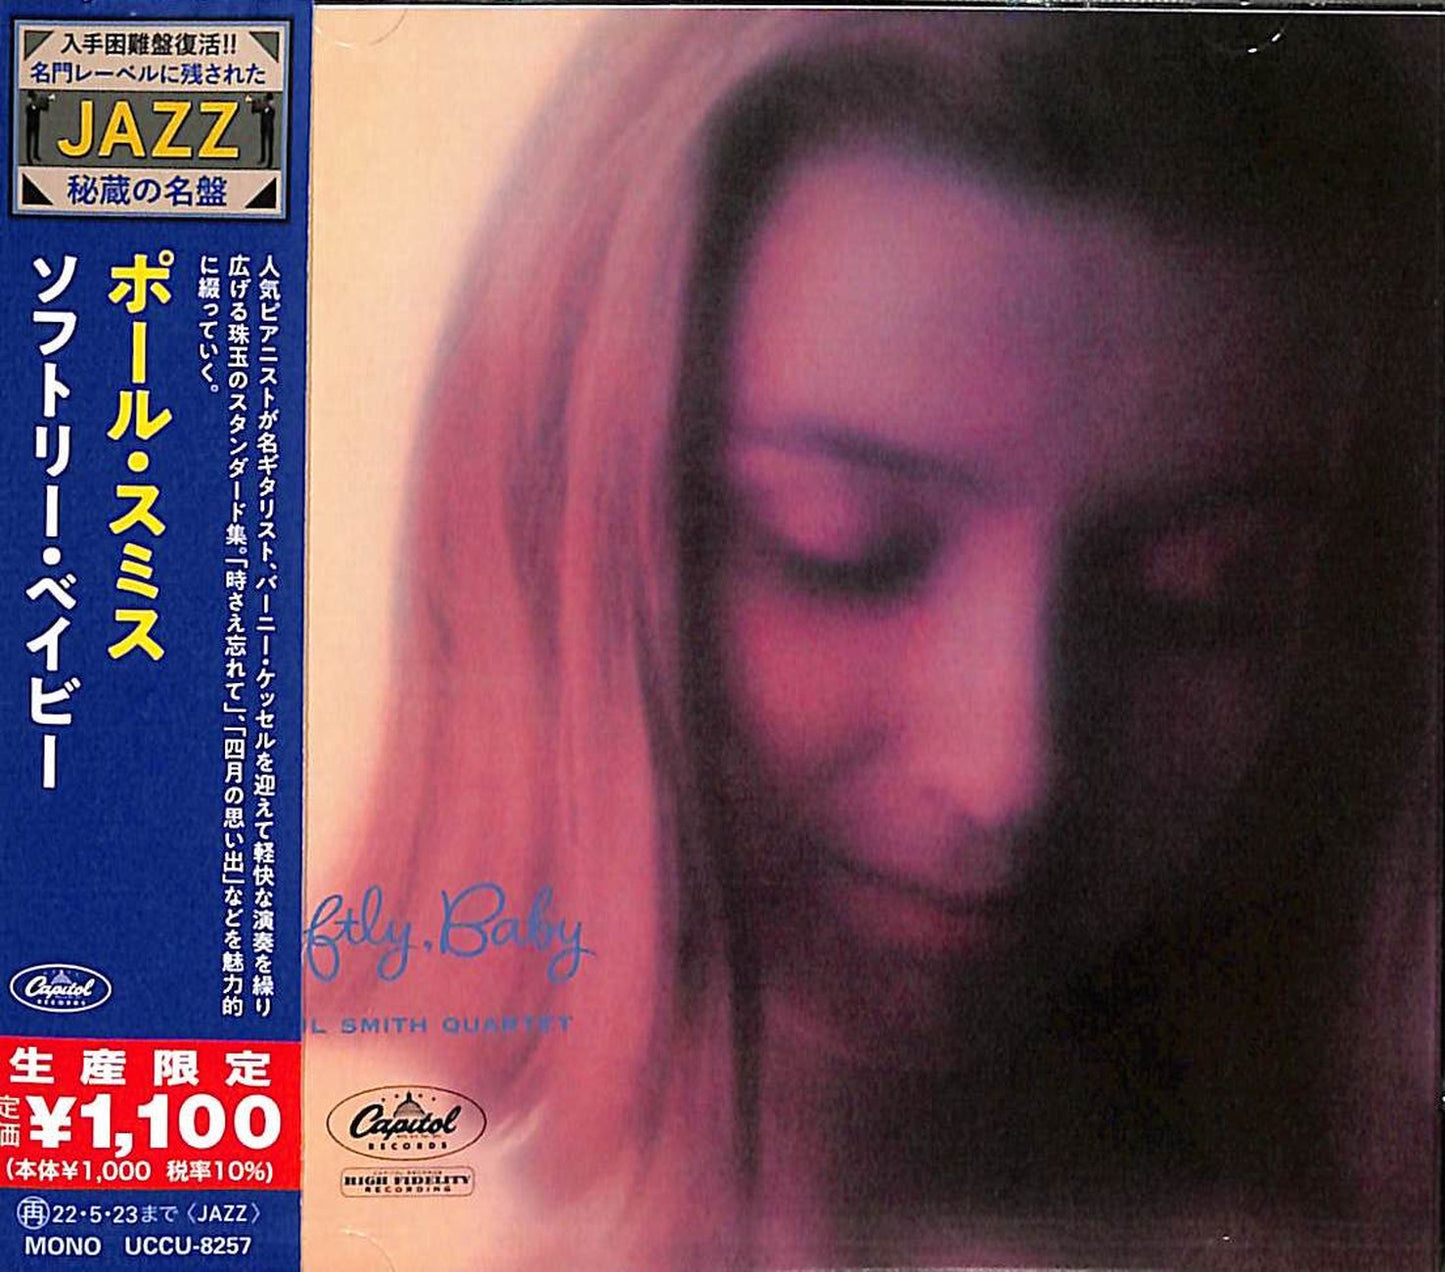 Paul Smith - Softly Baby - Japan  CD Limited Edition